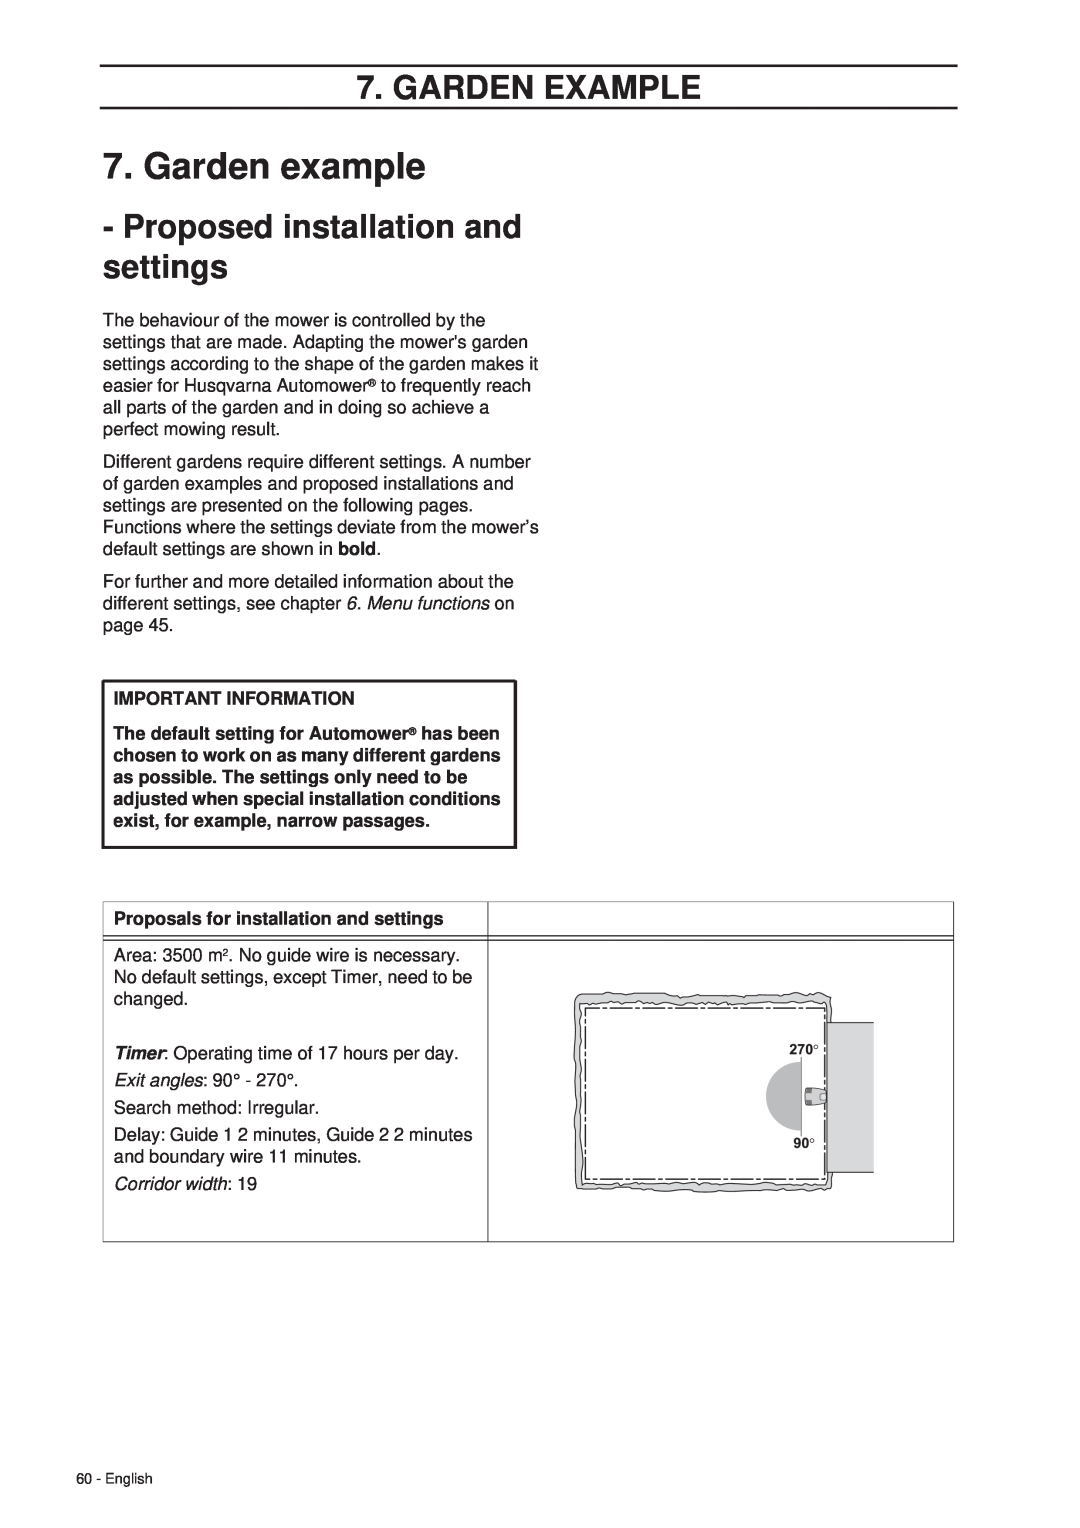 Husqvarna 260 ACX manual Garden example, Garden Example, Proposals for installation and settings, Important Information 